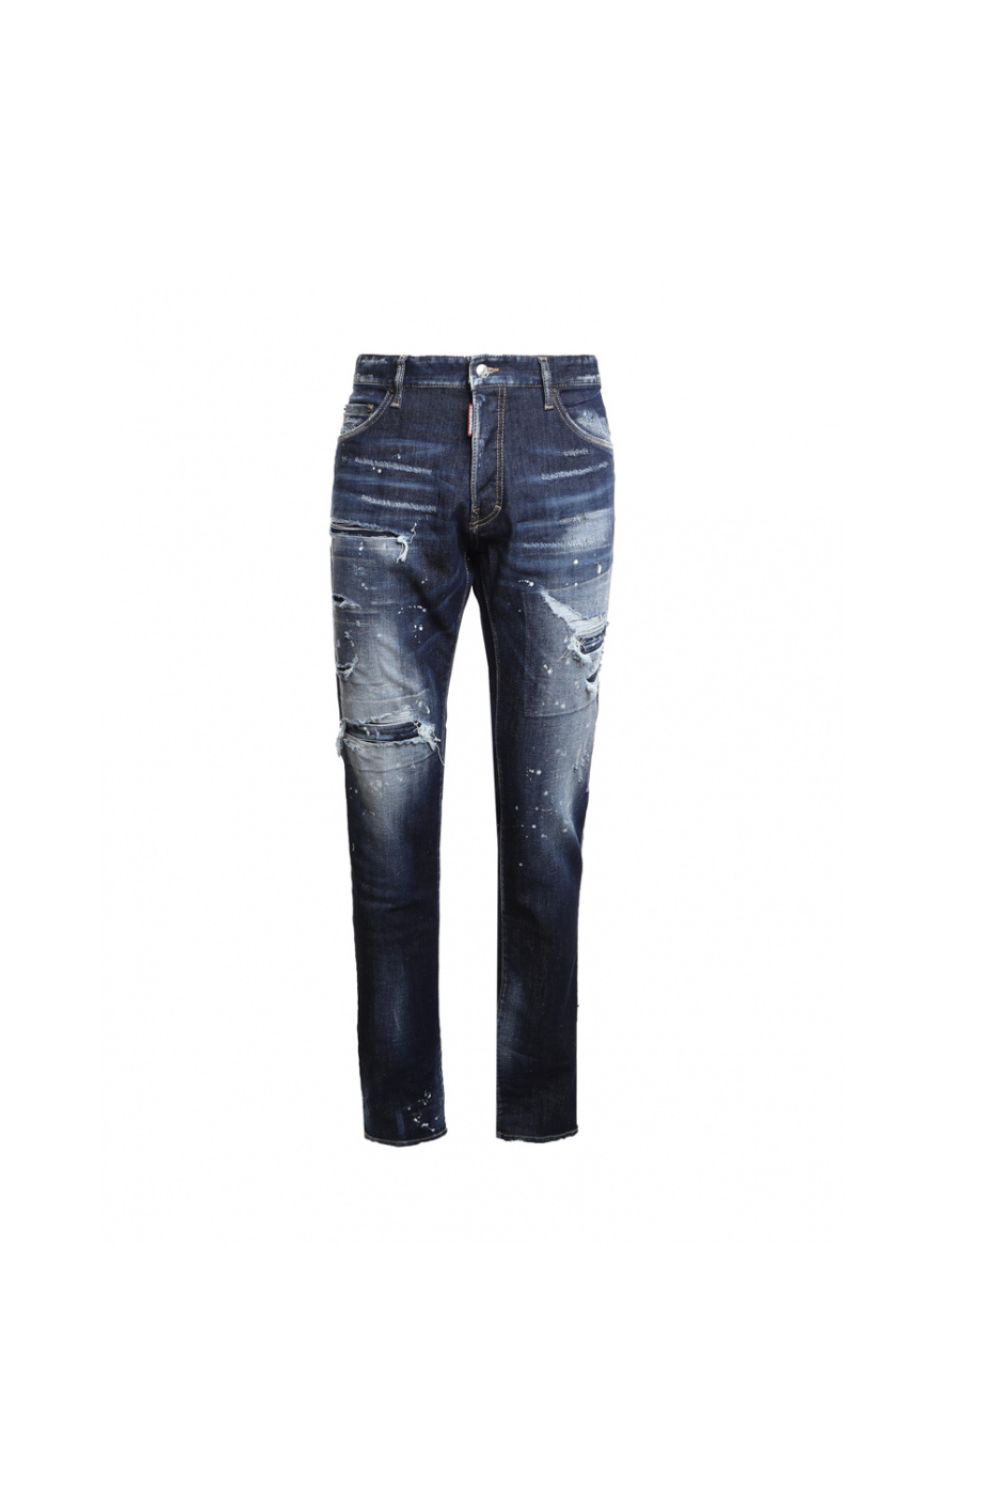 Dsquared2 “Cool Guy” jeans stretch